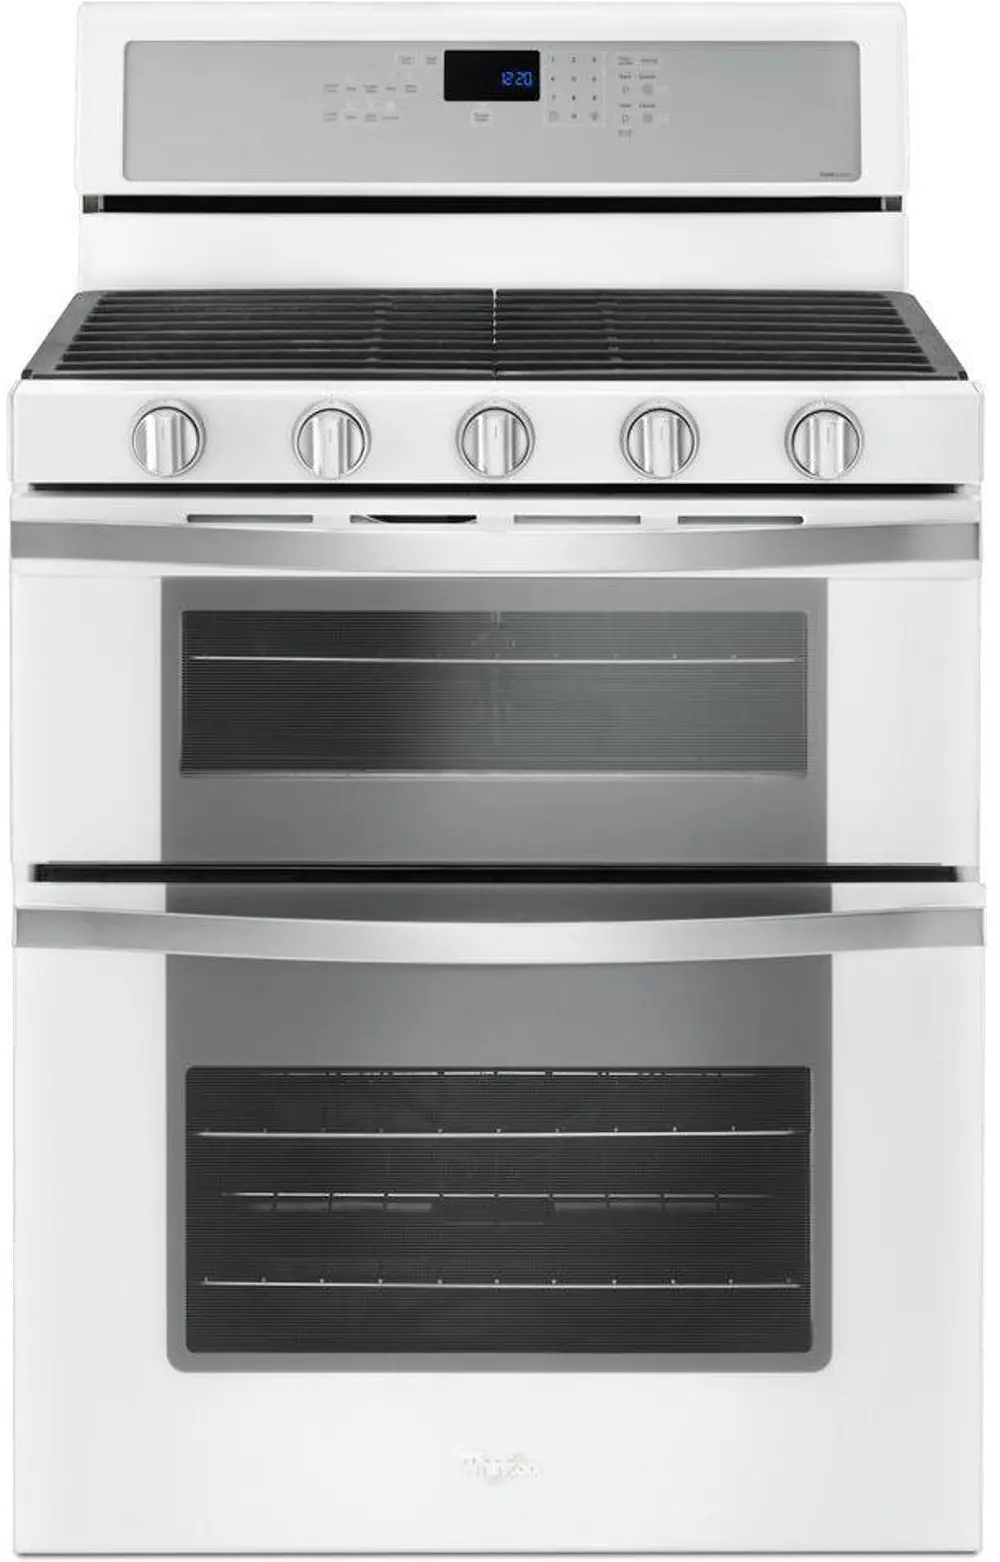 WGG745S0FH Whirlpool Double Oven Gas Range - 6.0 cu. ft. White-1